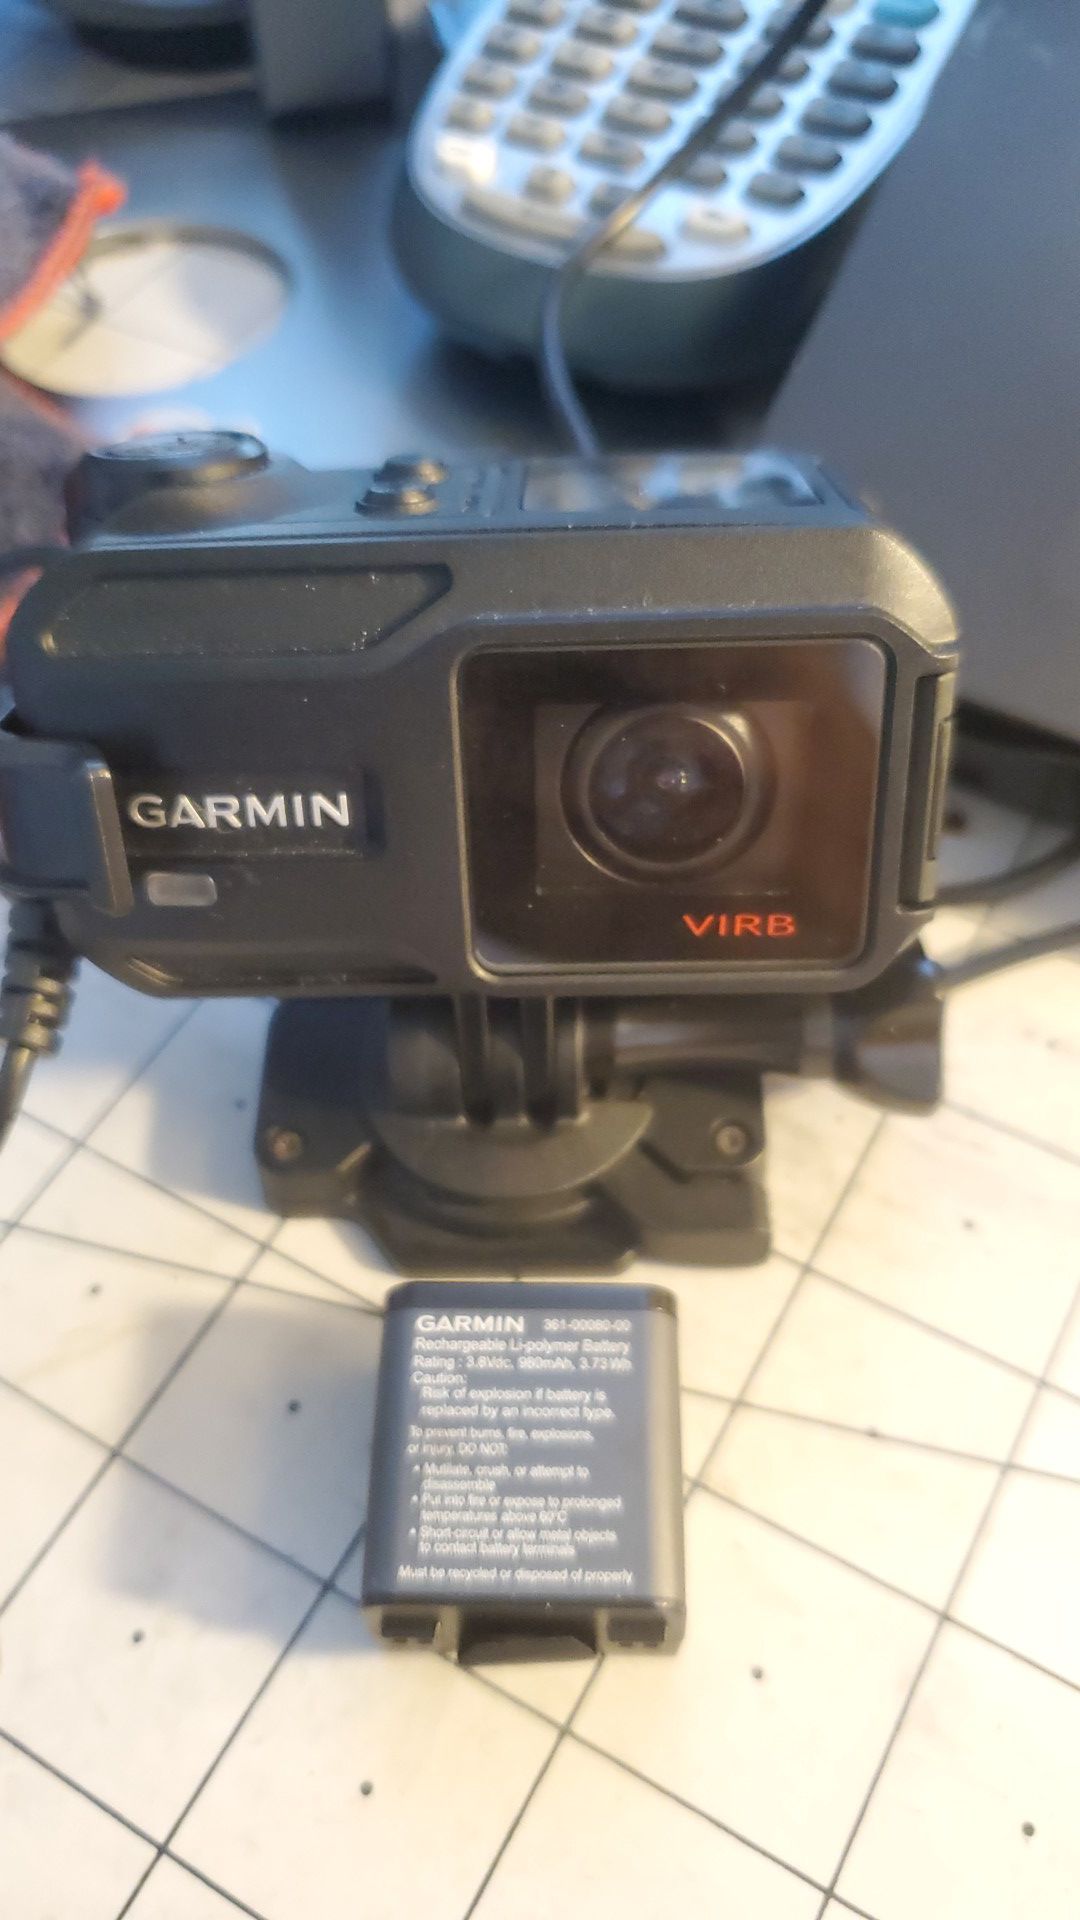 Garmin VIRB XE Action Camera with extra battery $225 or best offer